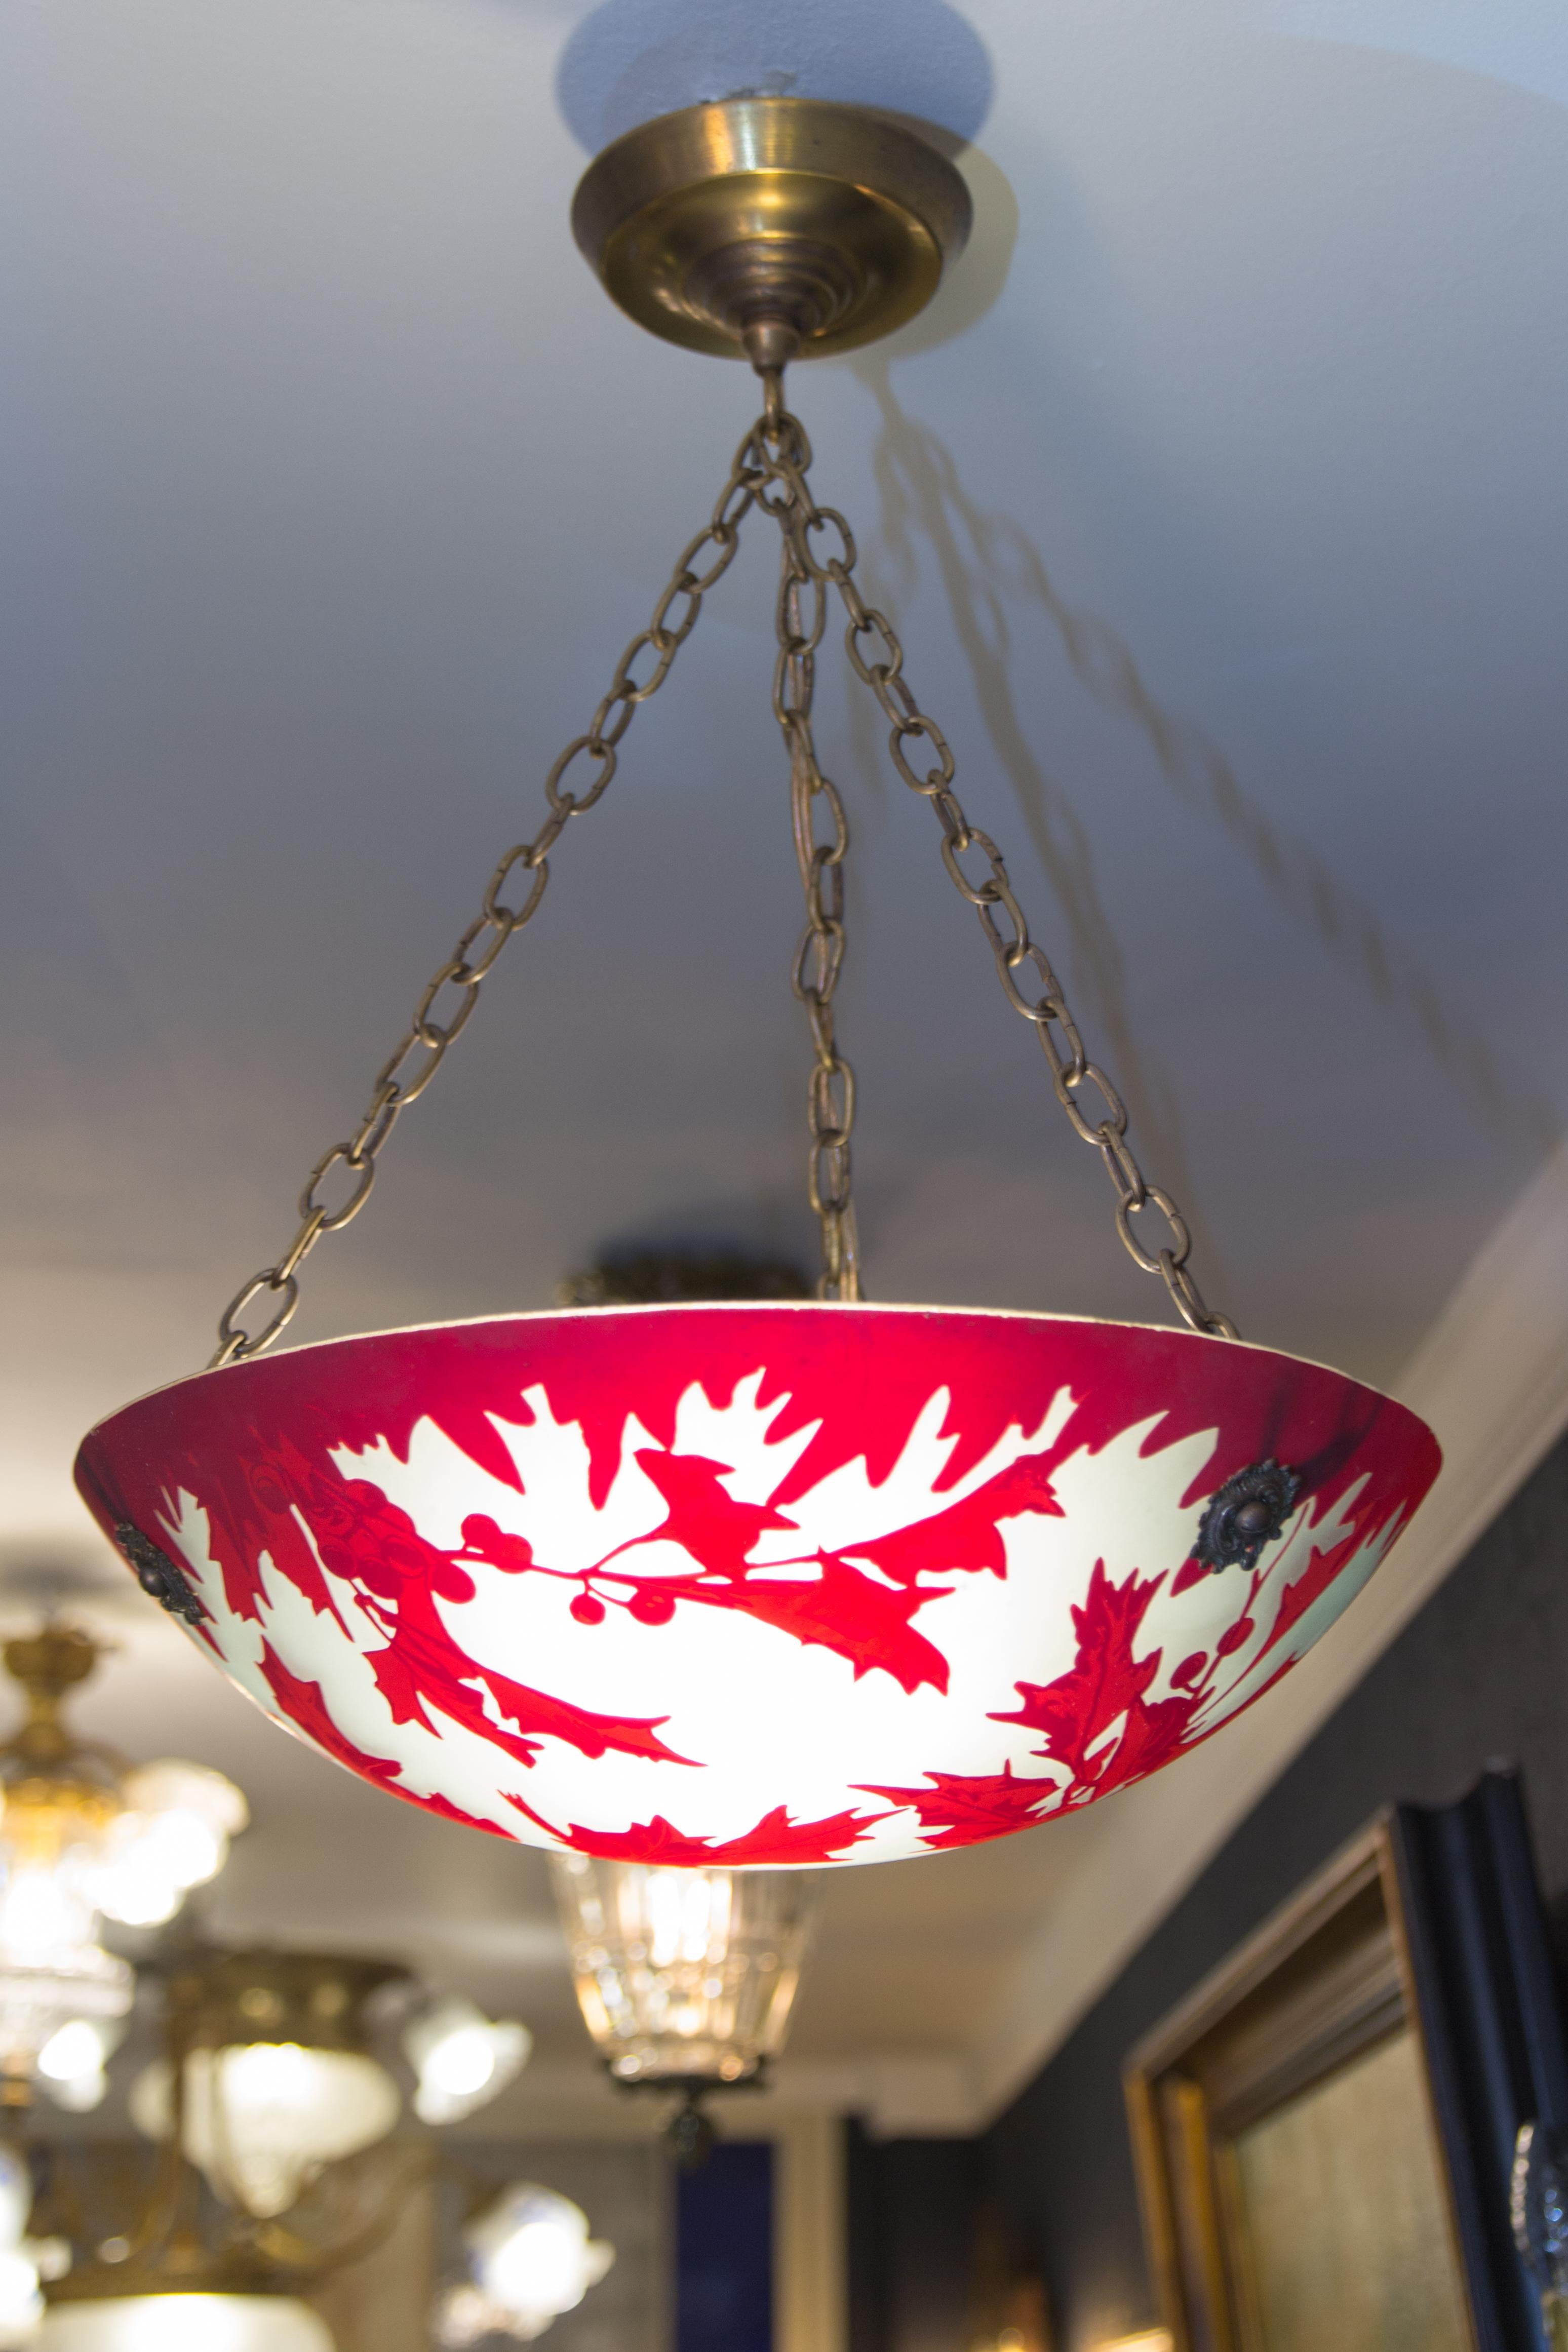 French Art Deco style pendant chandelier marked with Degue signature and red mistletoe leaves and berries on frosted glass. Brass and bronze fixture, one socket for E27 size light bulb.
Measures: Height is 20 inches / 50 cm; diameter - 13.3 inches /